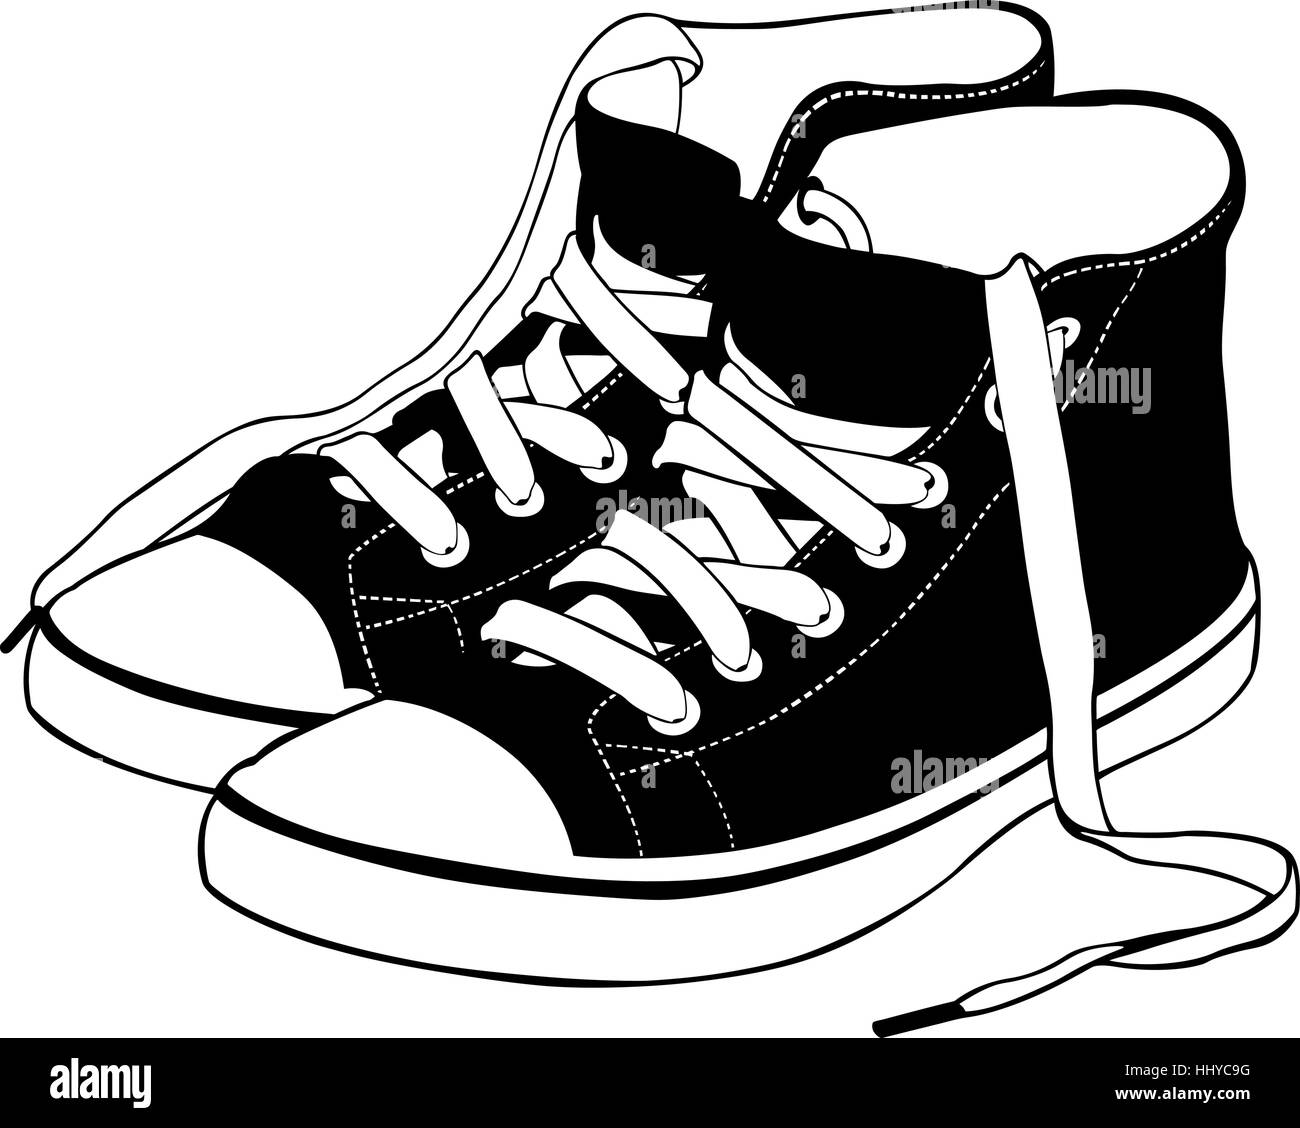 illustration of shoes isolated Stock Vector